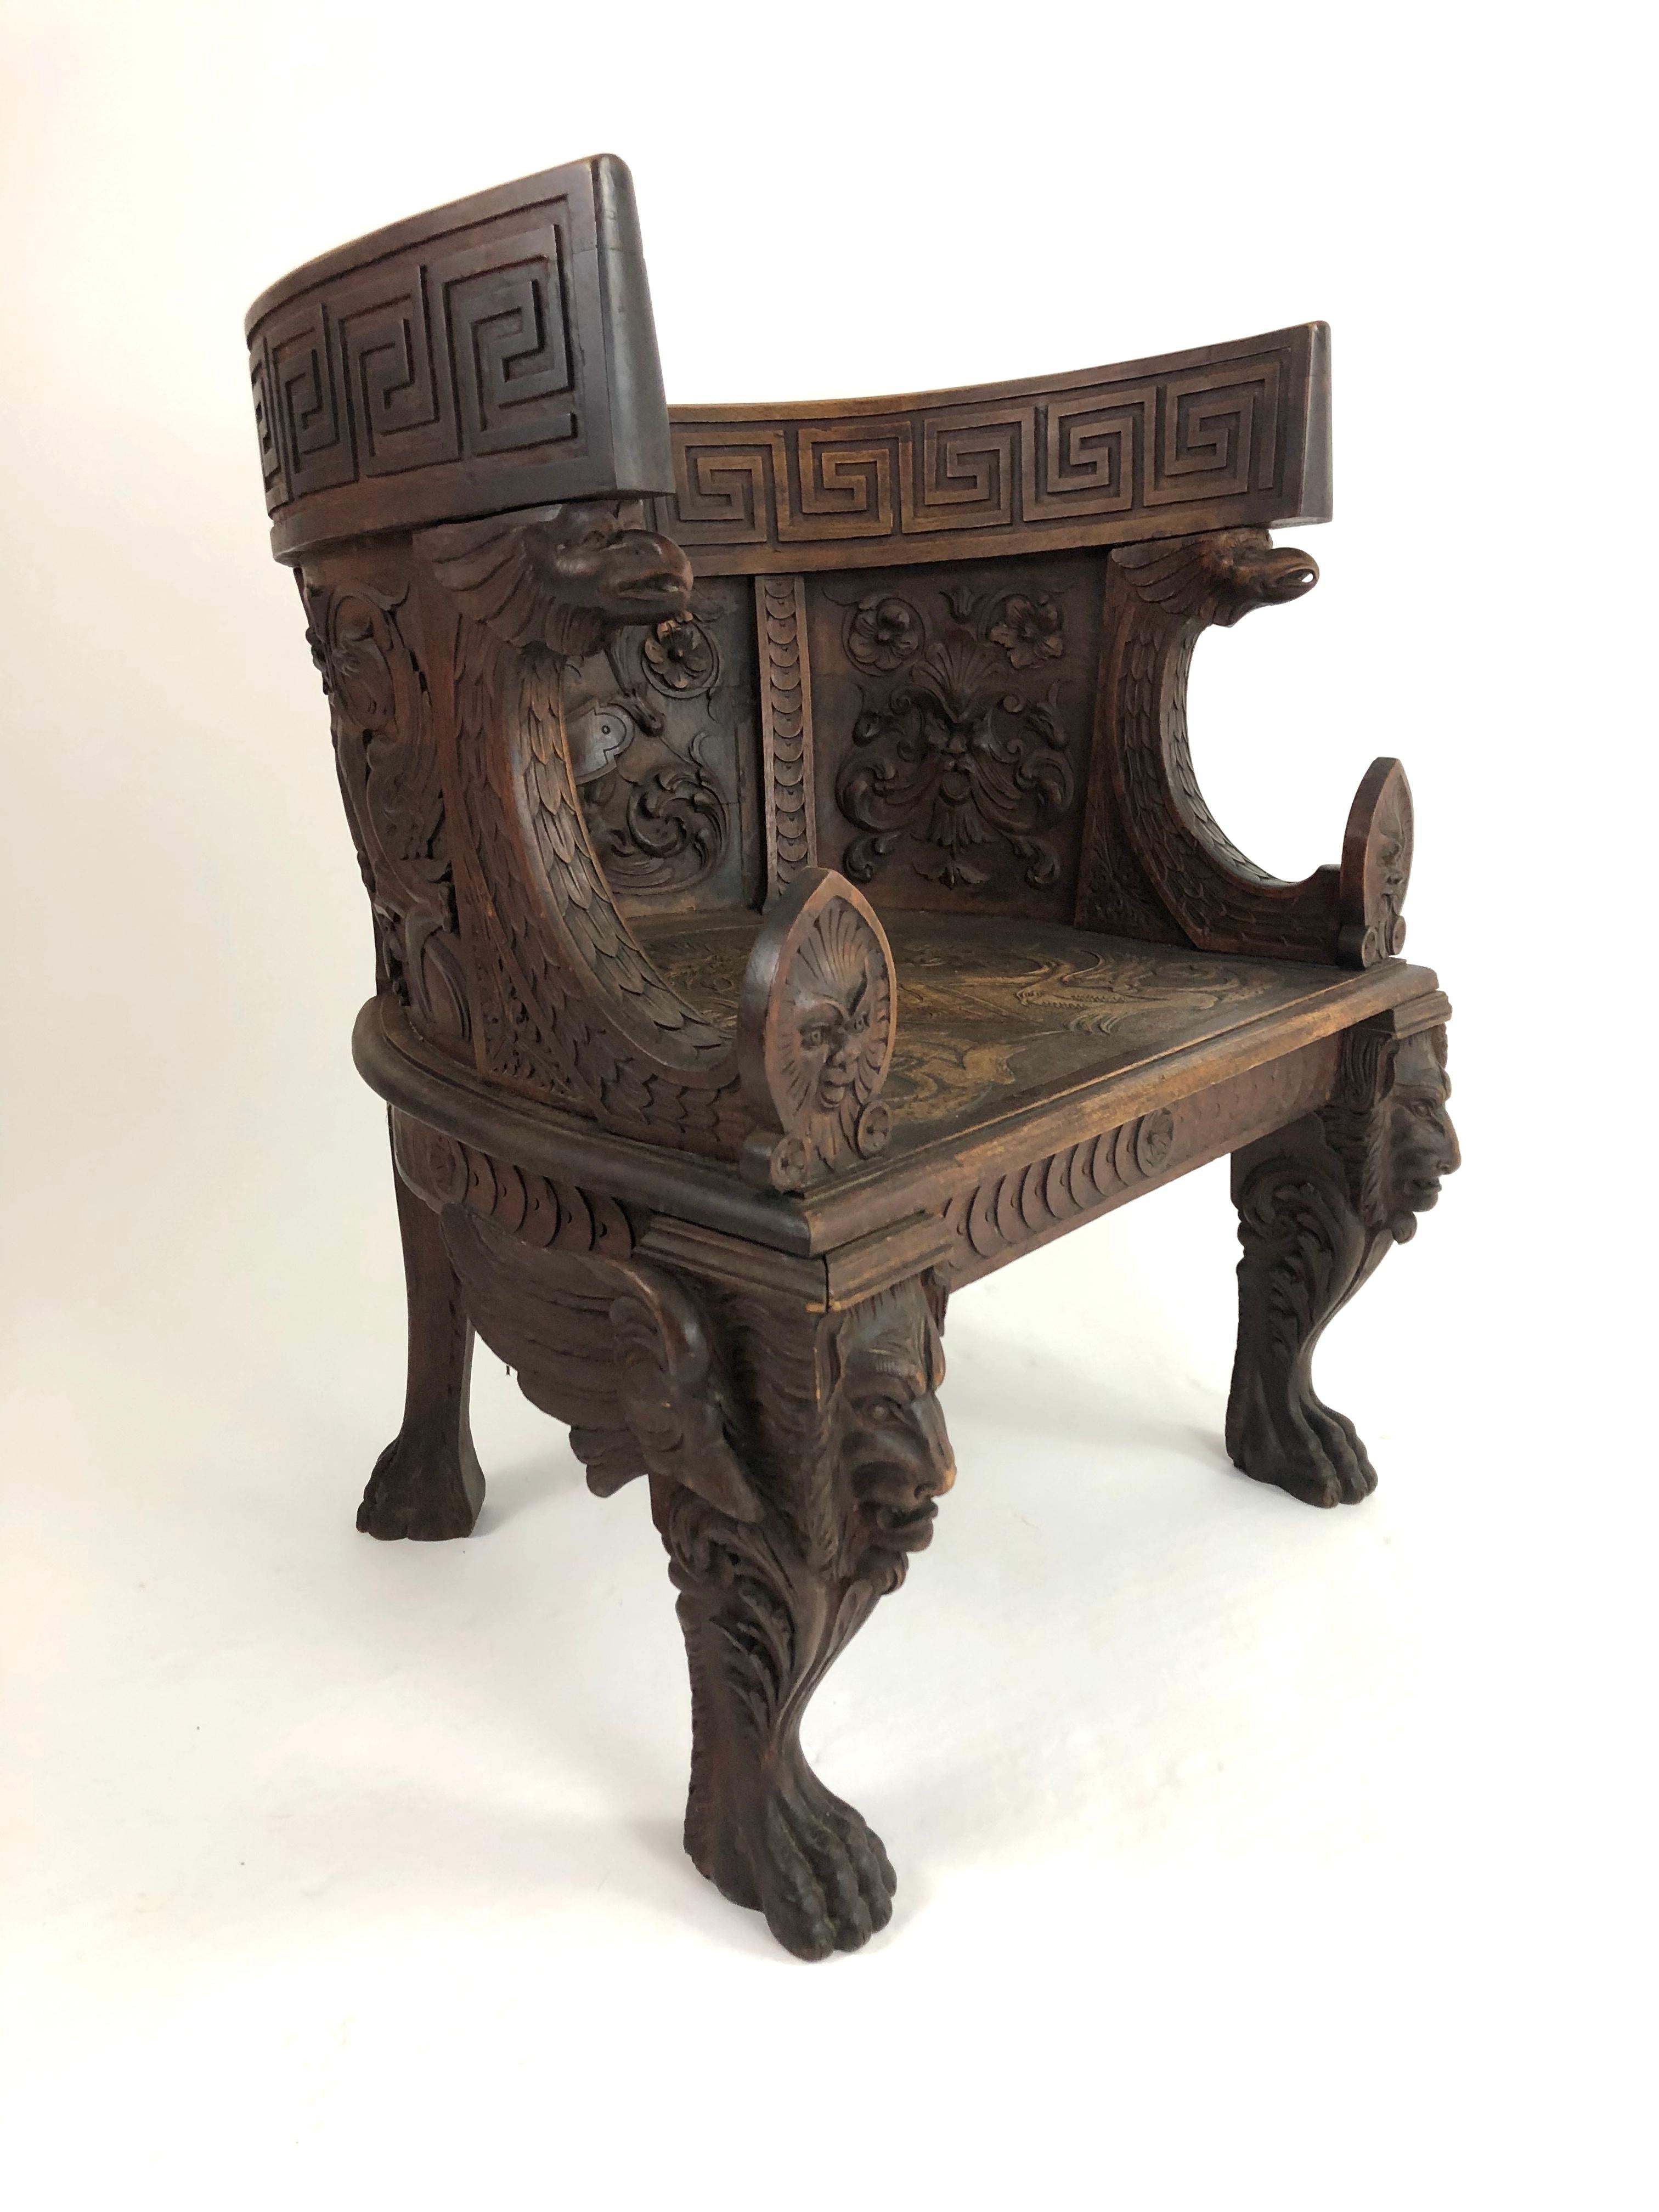 A highly sculptural, architectural and decorative neoclassical style carved walnut Grand Tour throne-like arm chair, richly carved overall, with a band of Greek key decoration at the top over panels with floral and foliate decoration above the seat